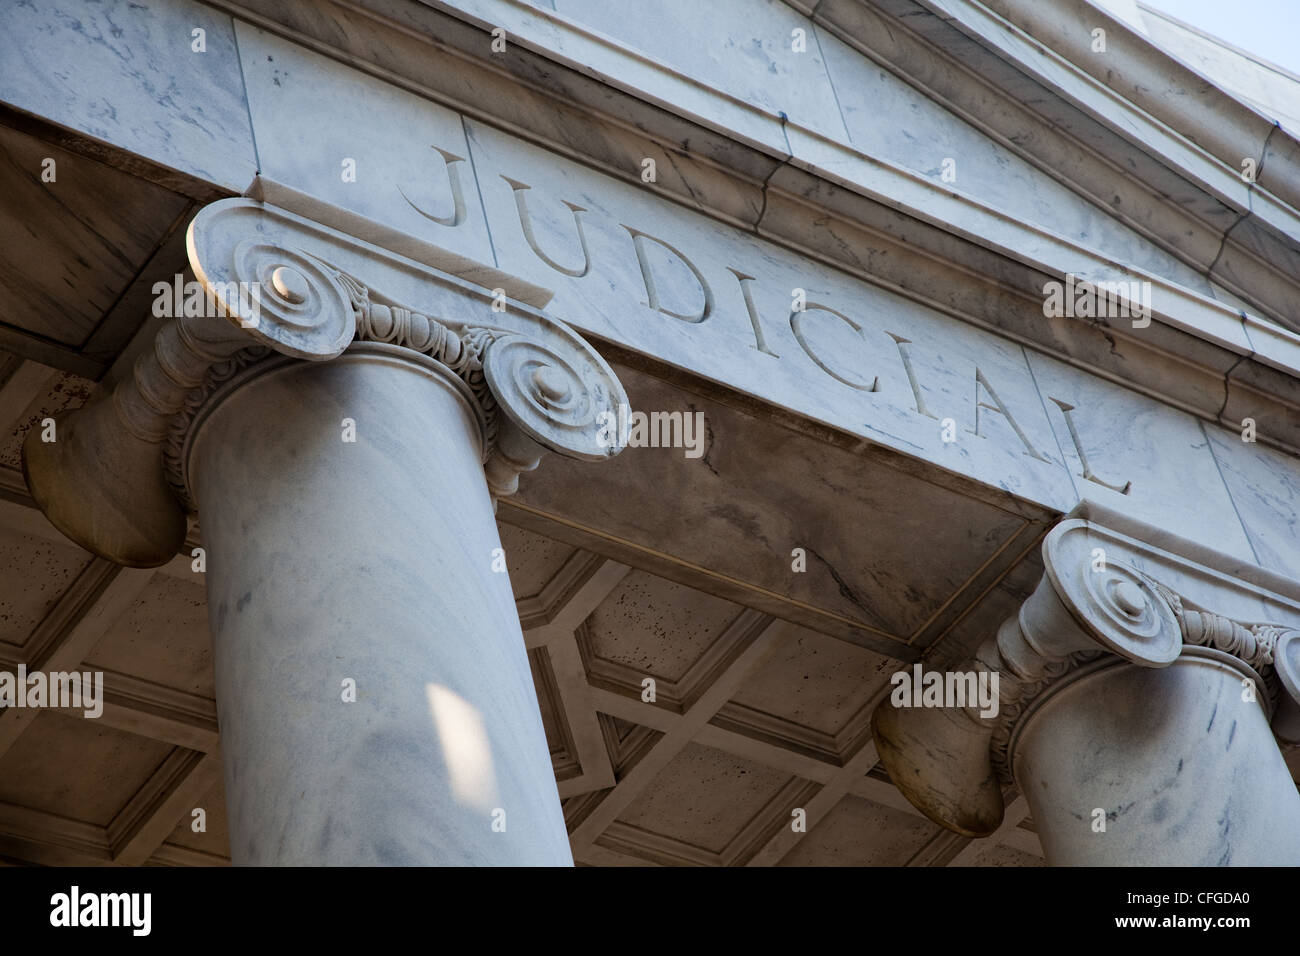 Government building with Grecian columns Stock Photo